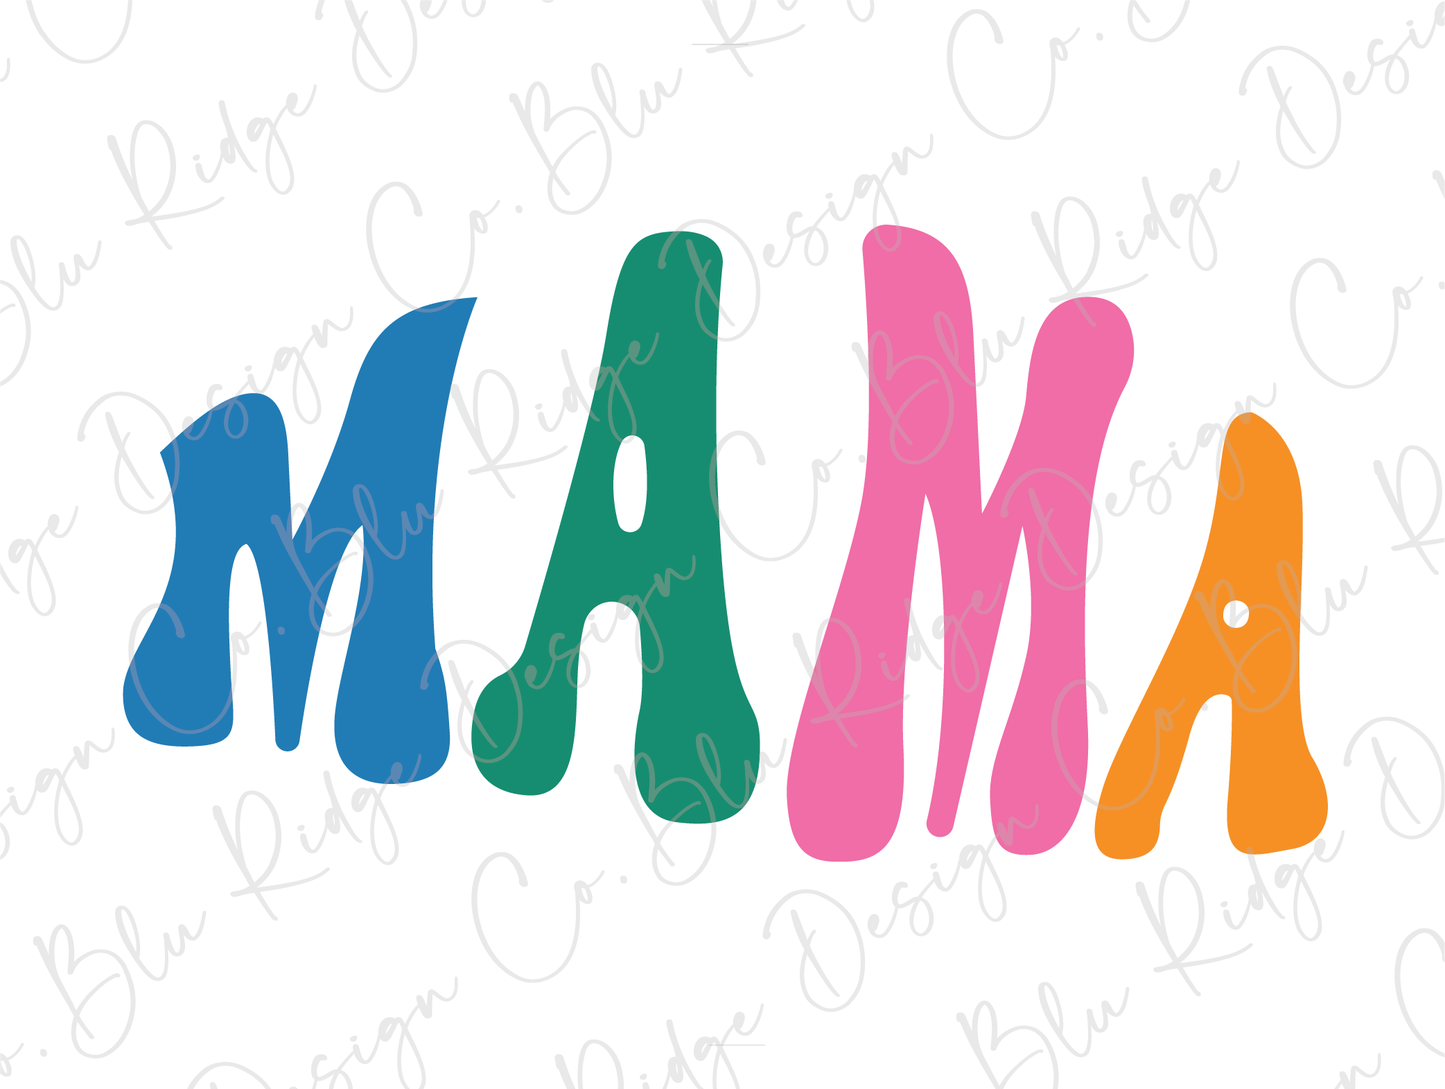 Retro Groovy Colorful Mama Direct To Film (DTF) Transfer